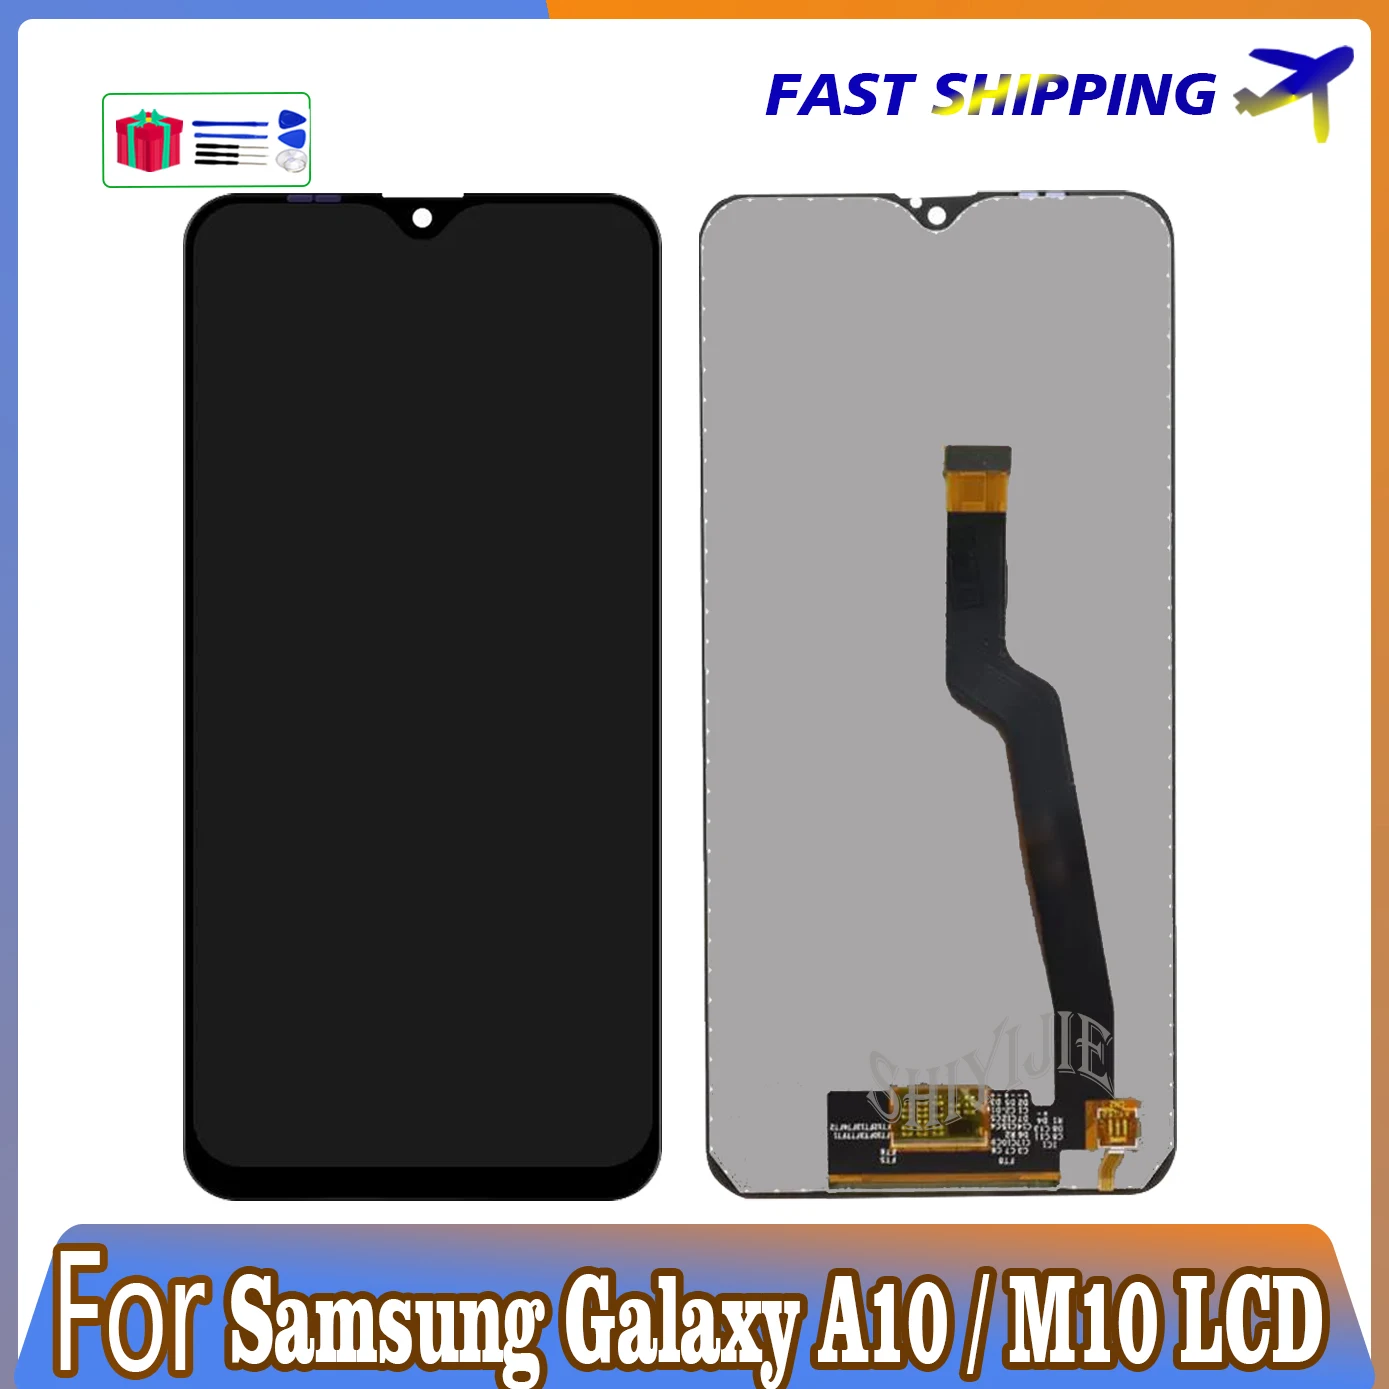 

6.2" Original LCD For Samsung Galaxy A10 A105 SM-A105F A105F LCD Display Touch Assembly Screen Replacement Digitizer 100% tested